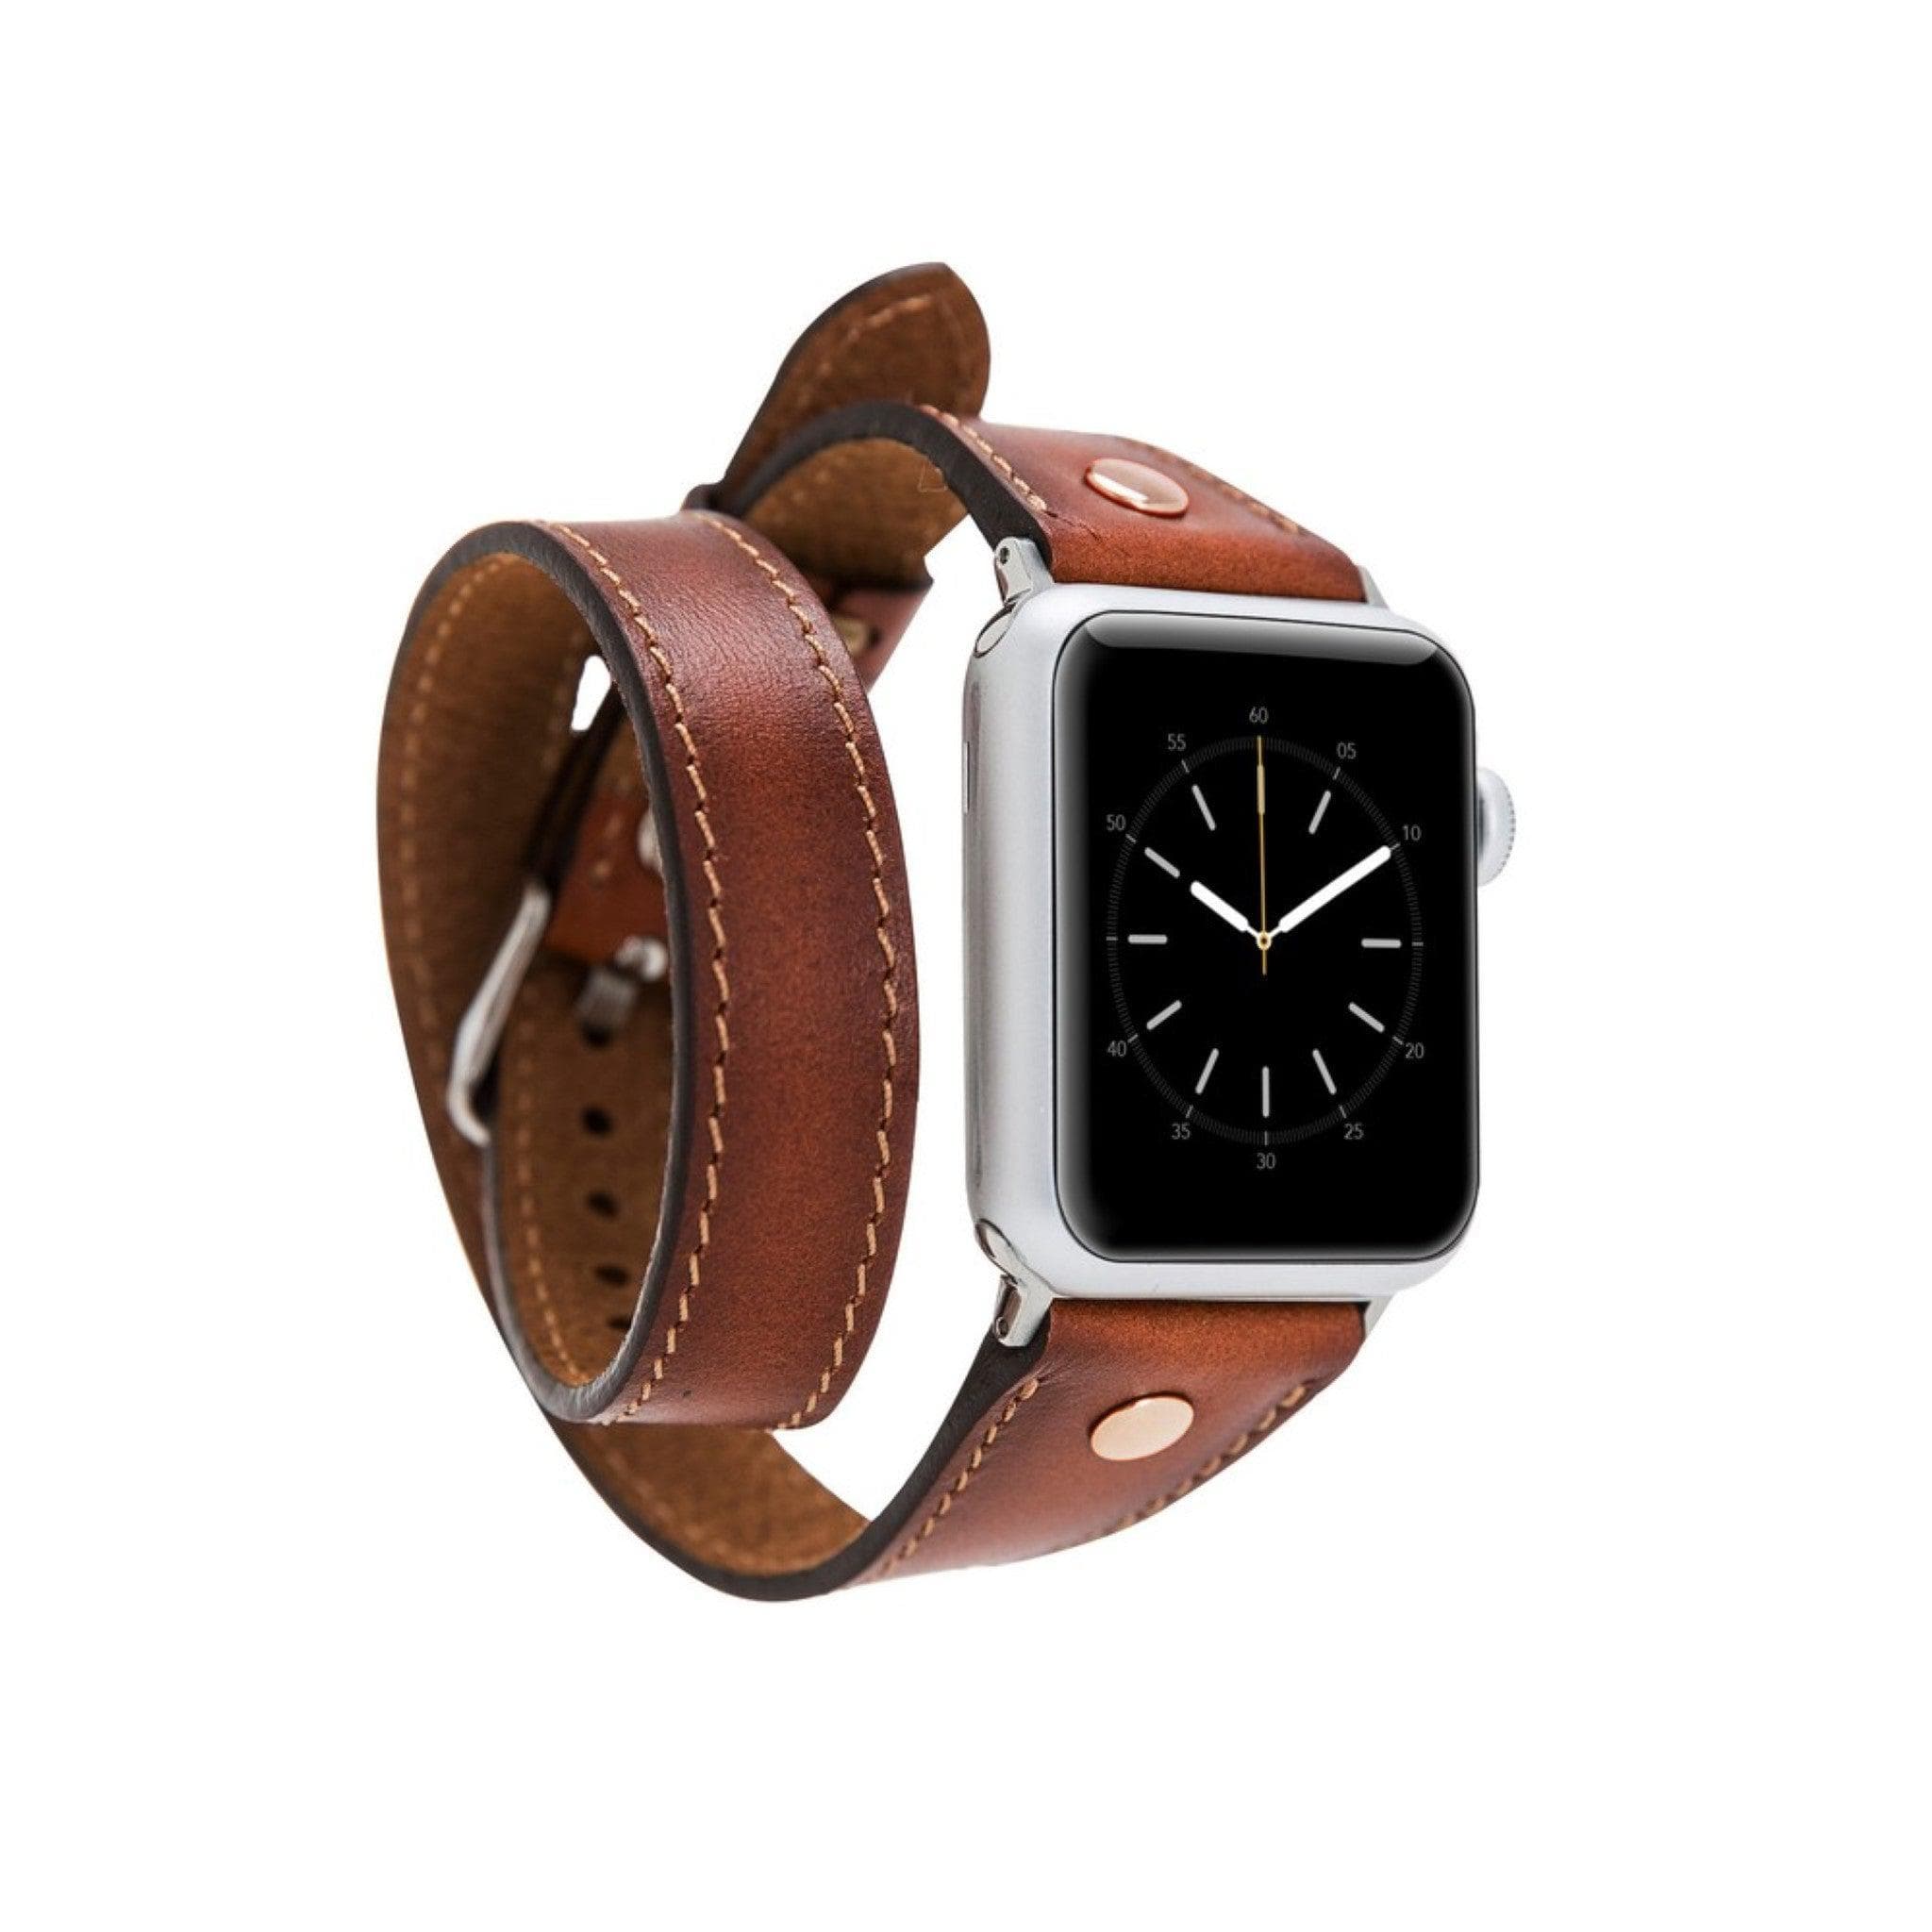 Leeds Double Tour Slim with Rose Gold Bead Apple Watch Leather Straps Tan Bouletta